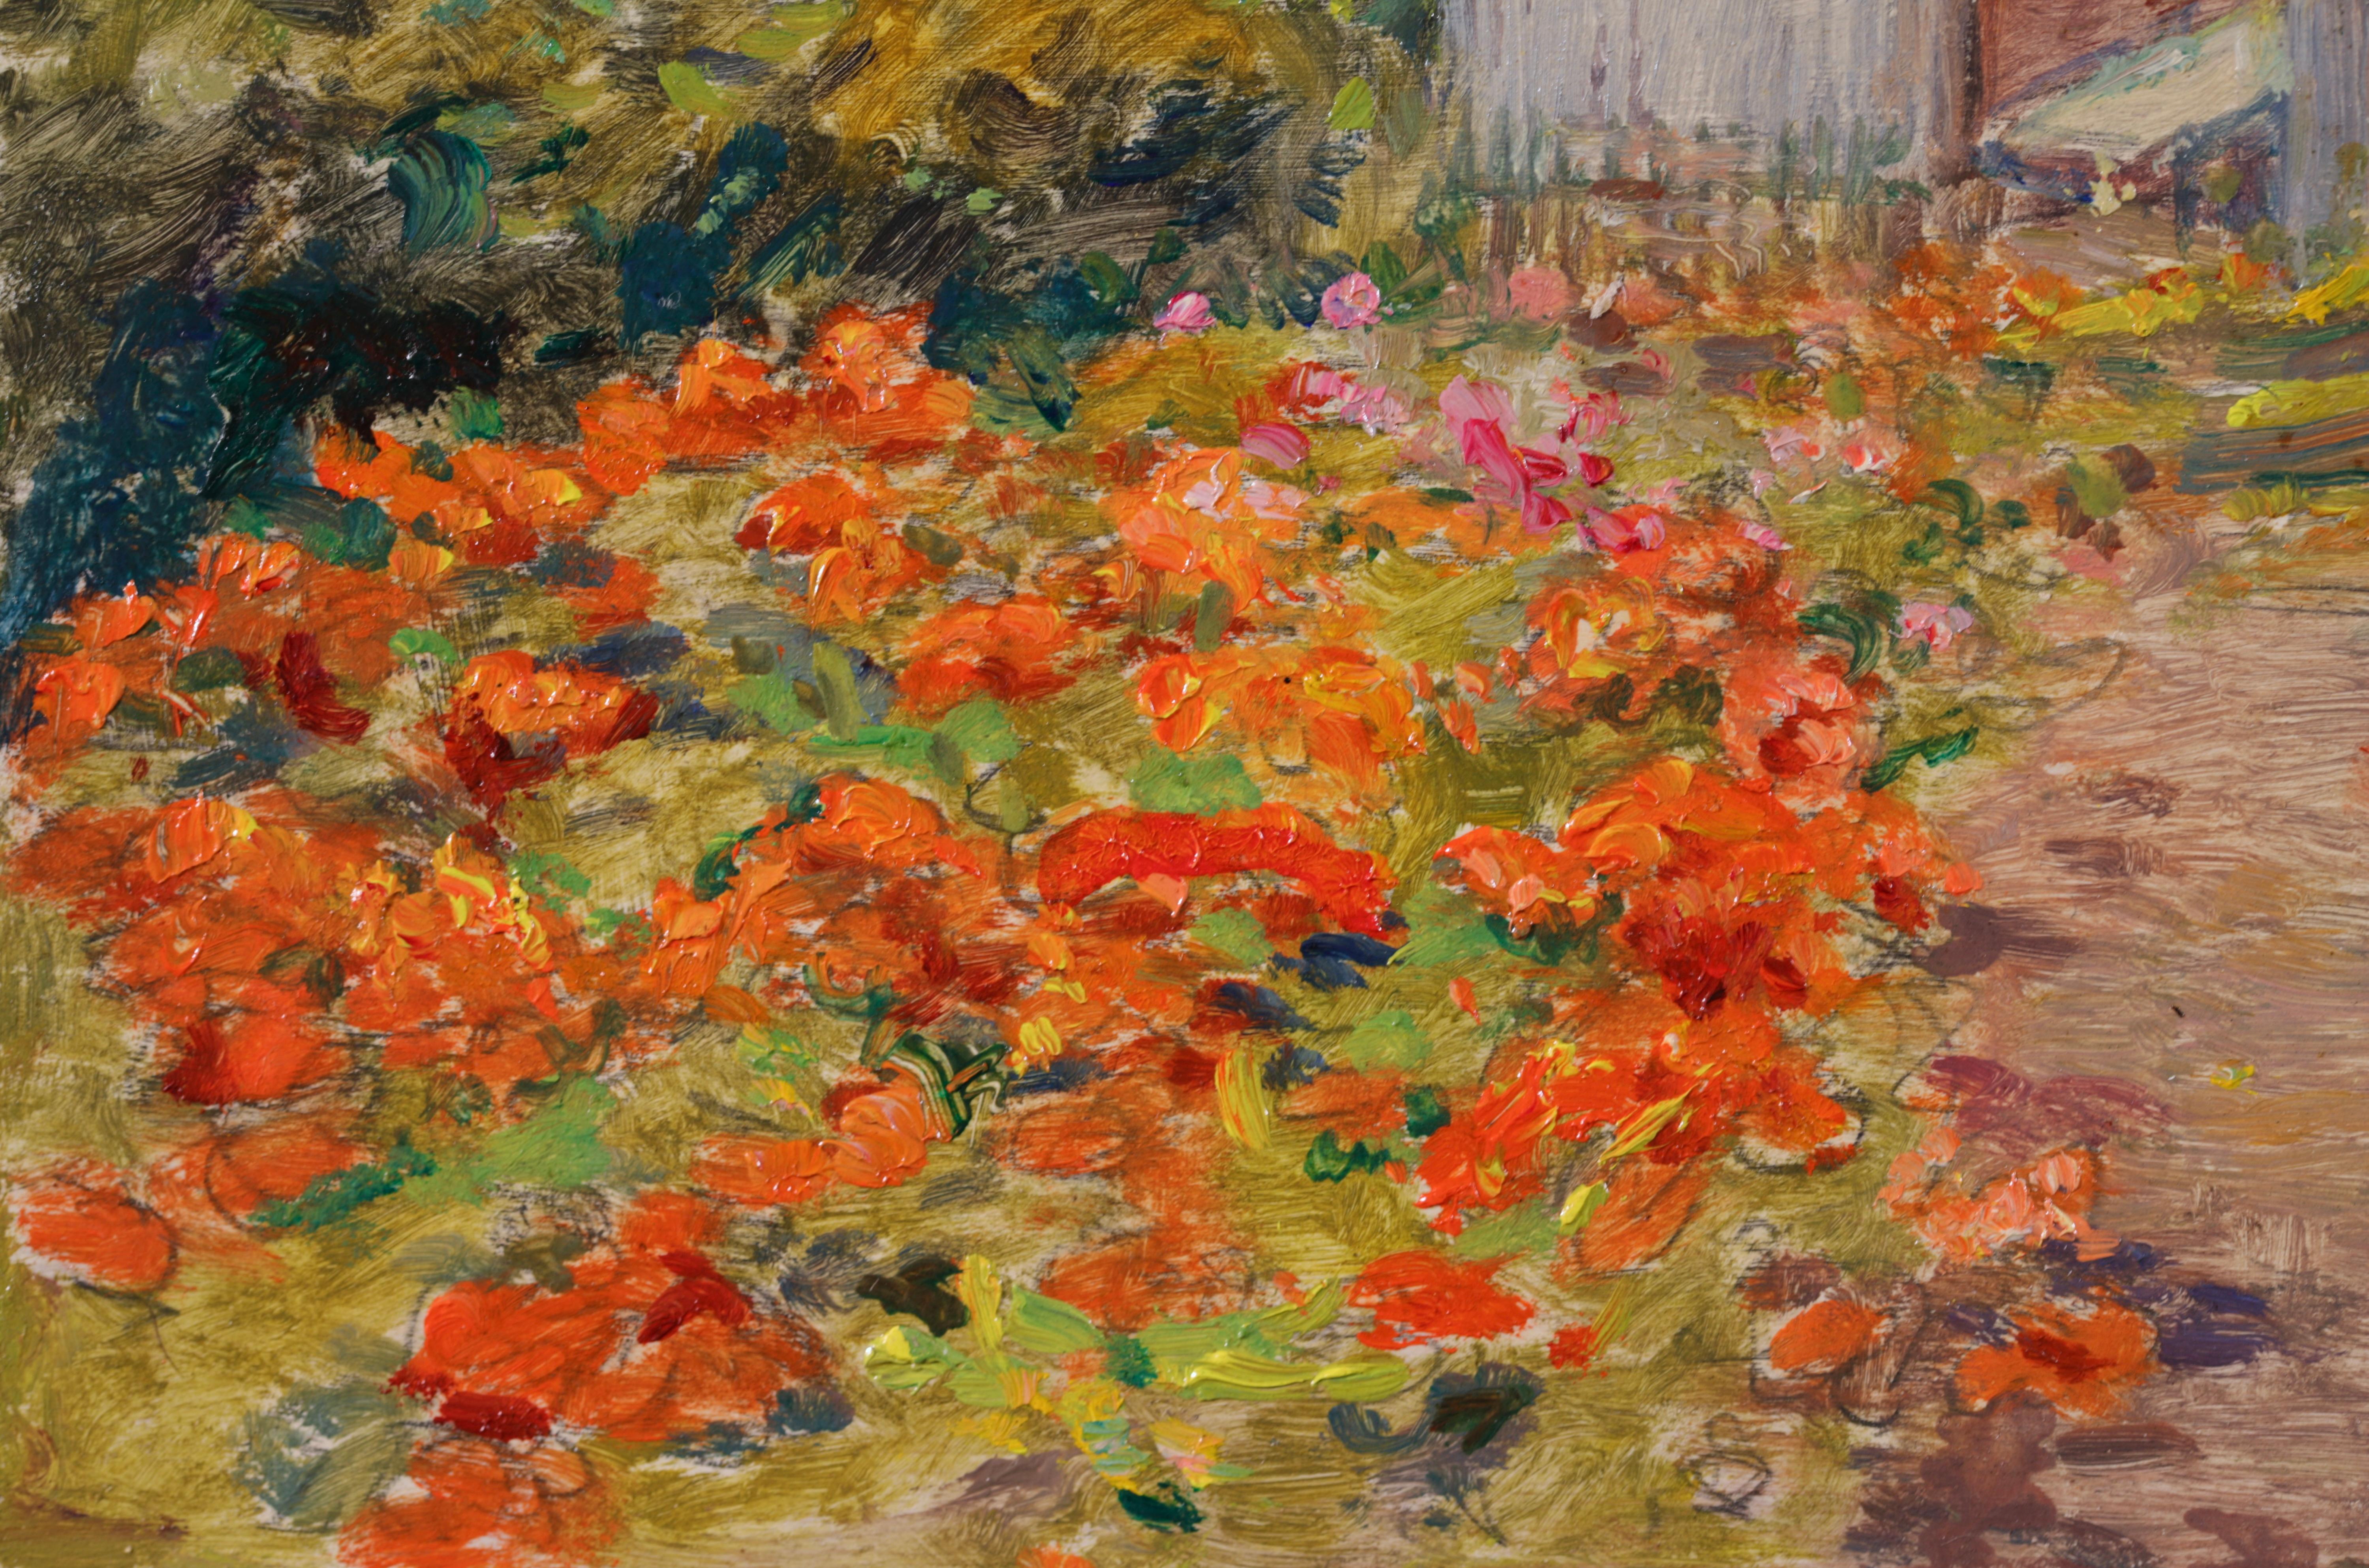 Signed and dated landscape oil on panel by French impressionist painter Henri Duhem. The painting depicts a view of the artist's garden of flowers, filled with orange, red and pink blooms. A path leads up to the buildings on the right and tall green